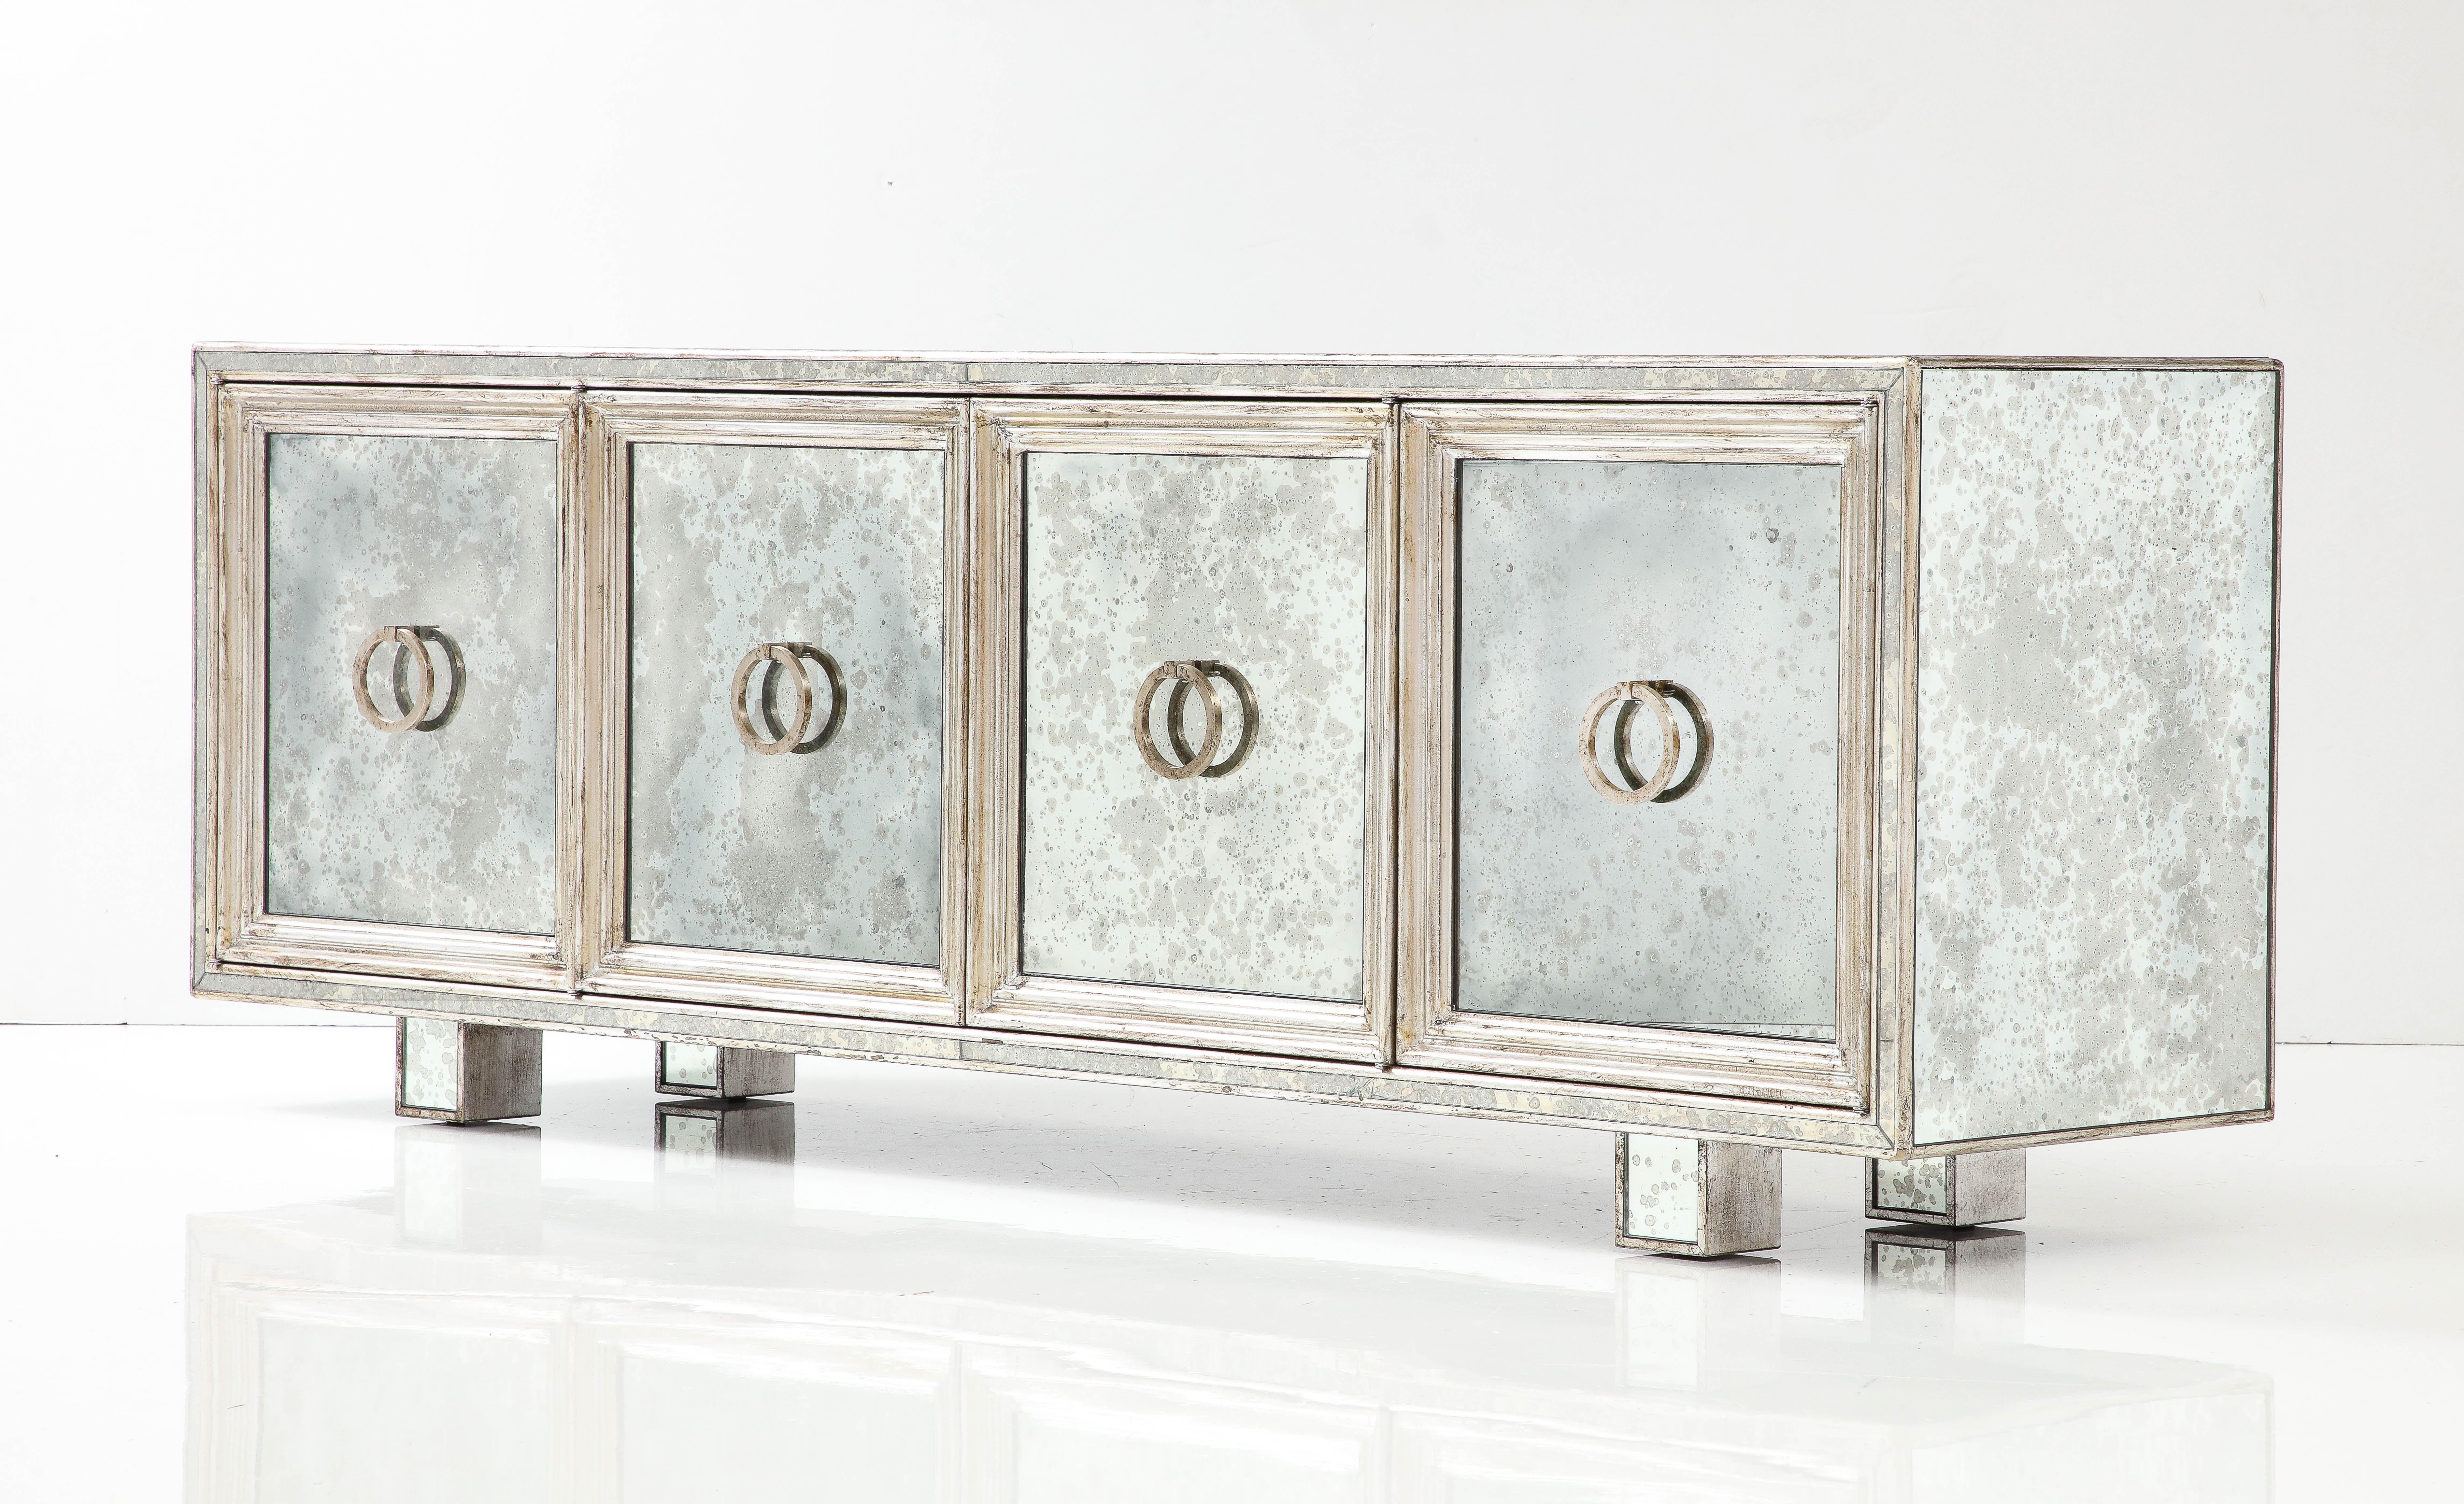 Custom made Art Deco influenced mirrored and silver leaf credenza featuring 4 panels with pulls which conceal 3 ample storage compartments. Each compartment housing 1 adjustable shelf. Style of James Mont.